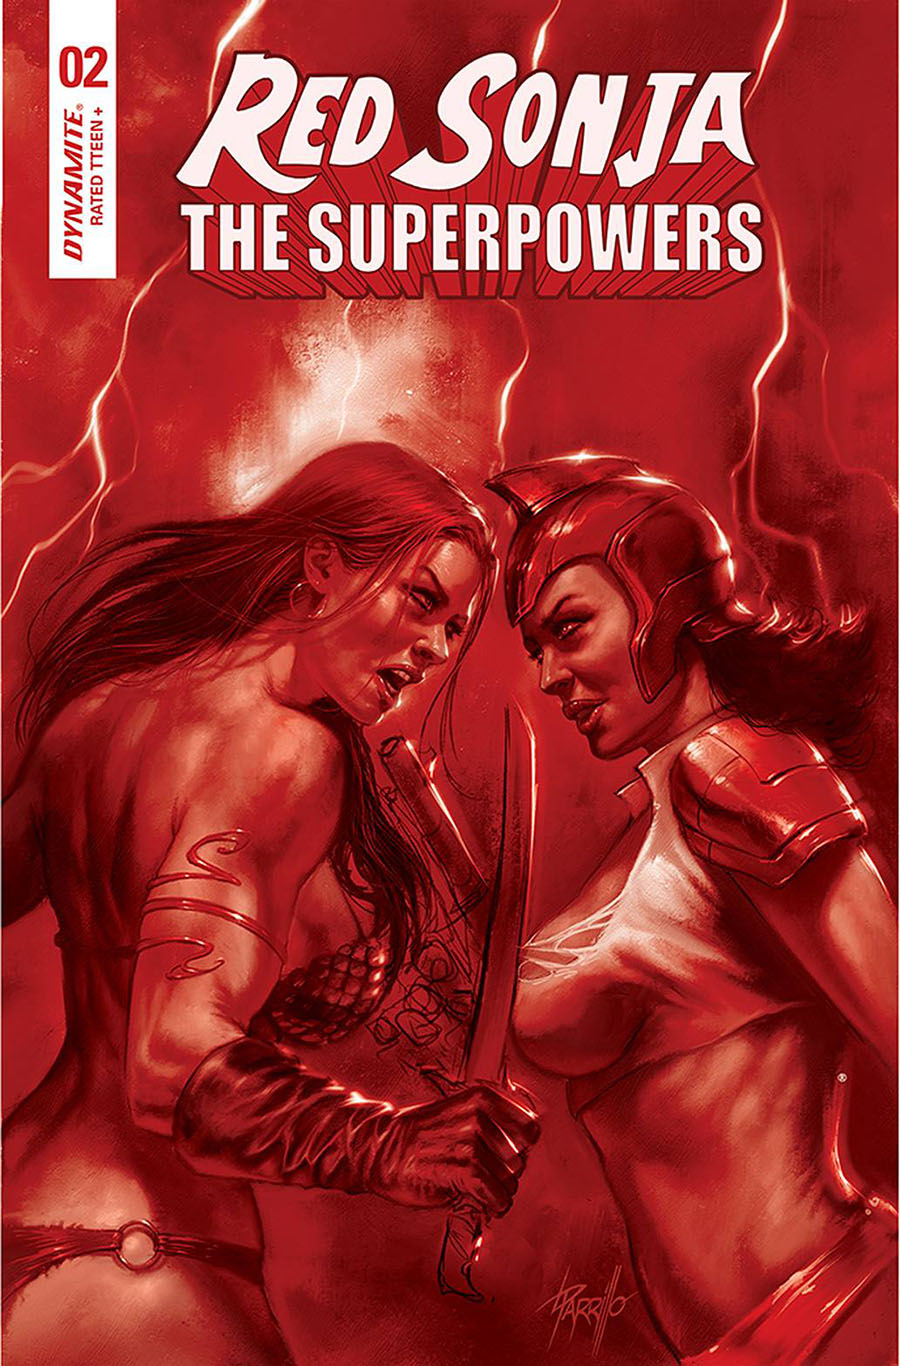 Red Sonja The Superpowers #2 Cover Z Ultra-Premium Limited Edition Lucio Parrillo Crimson Red Line Art Cover